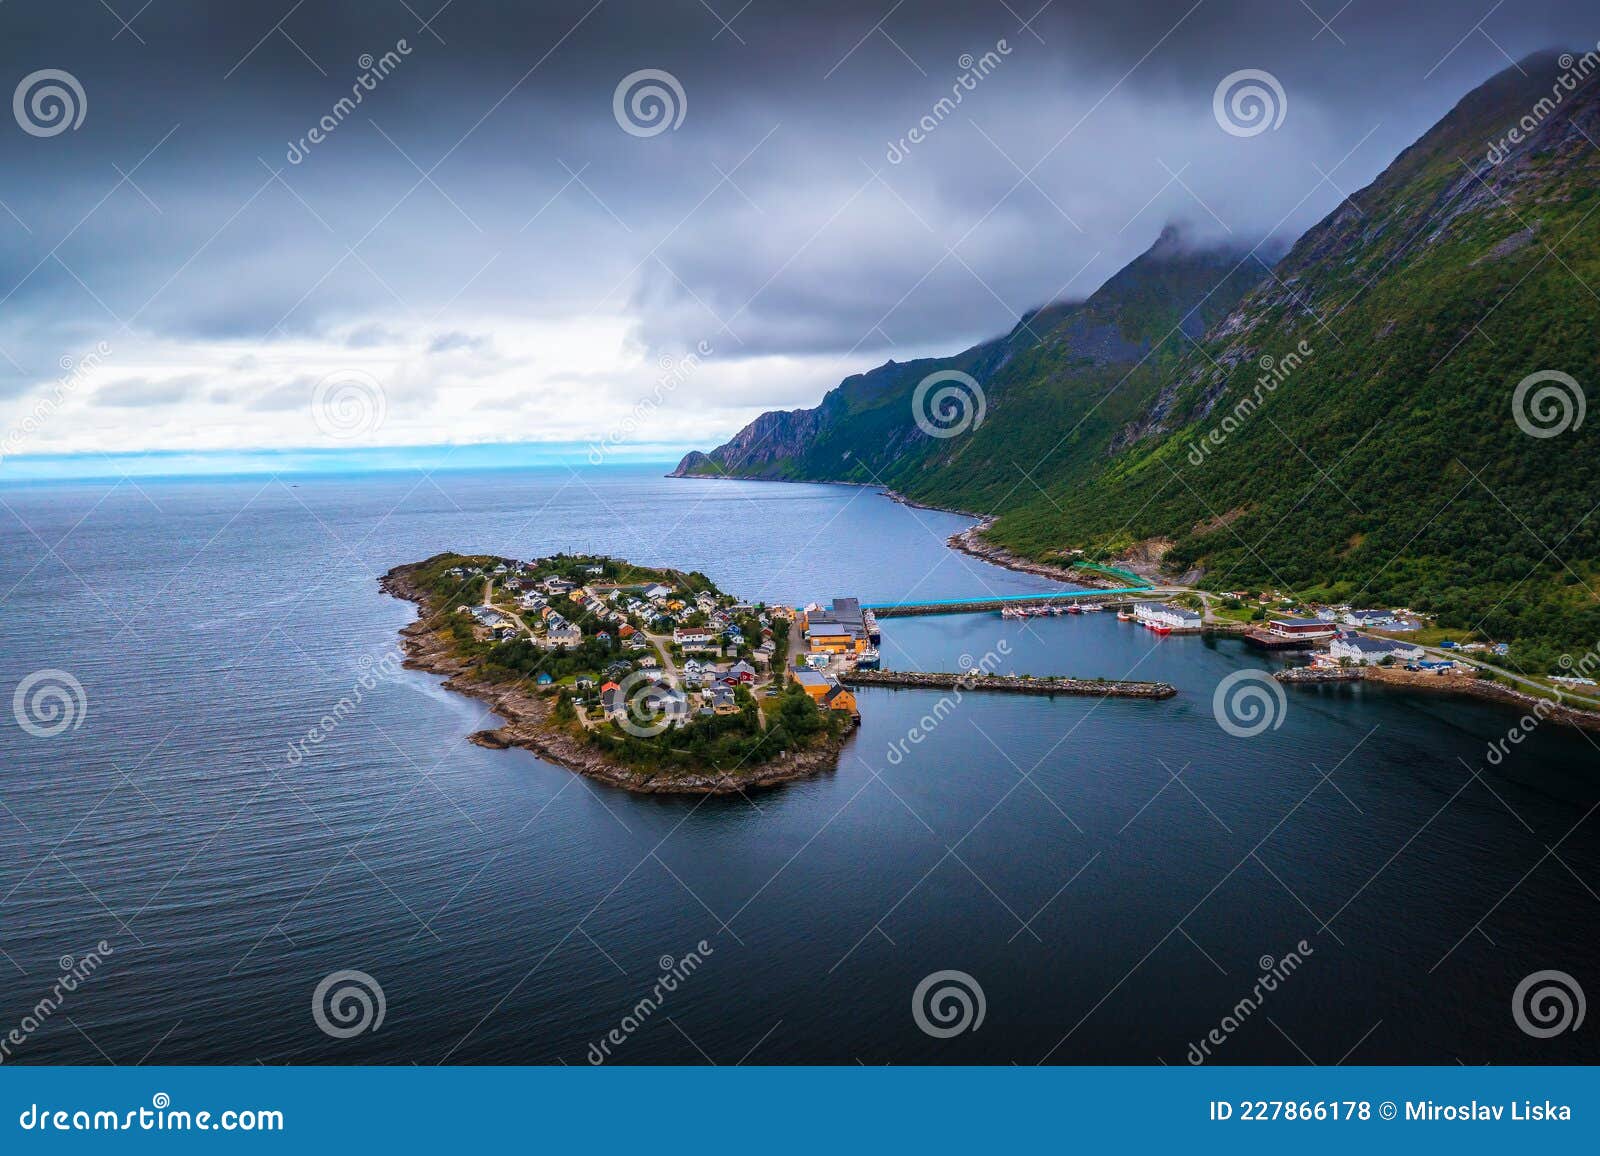 aerial view of the husoy fishing village on the senja island, norway